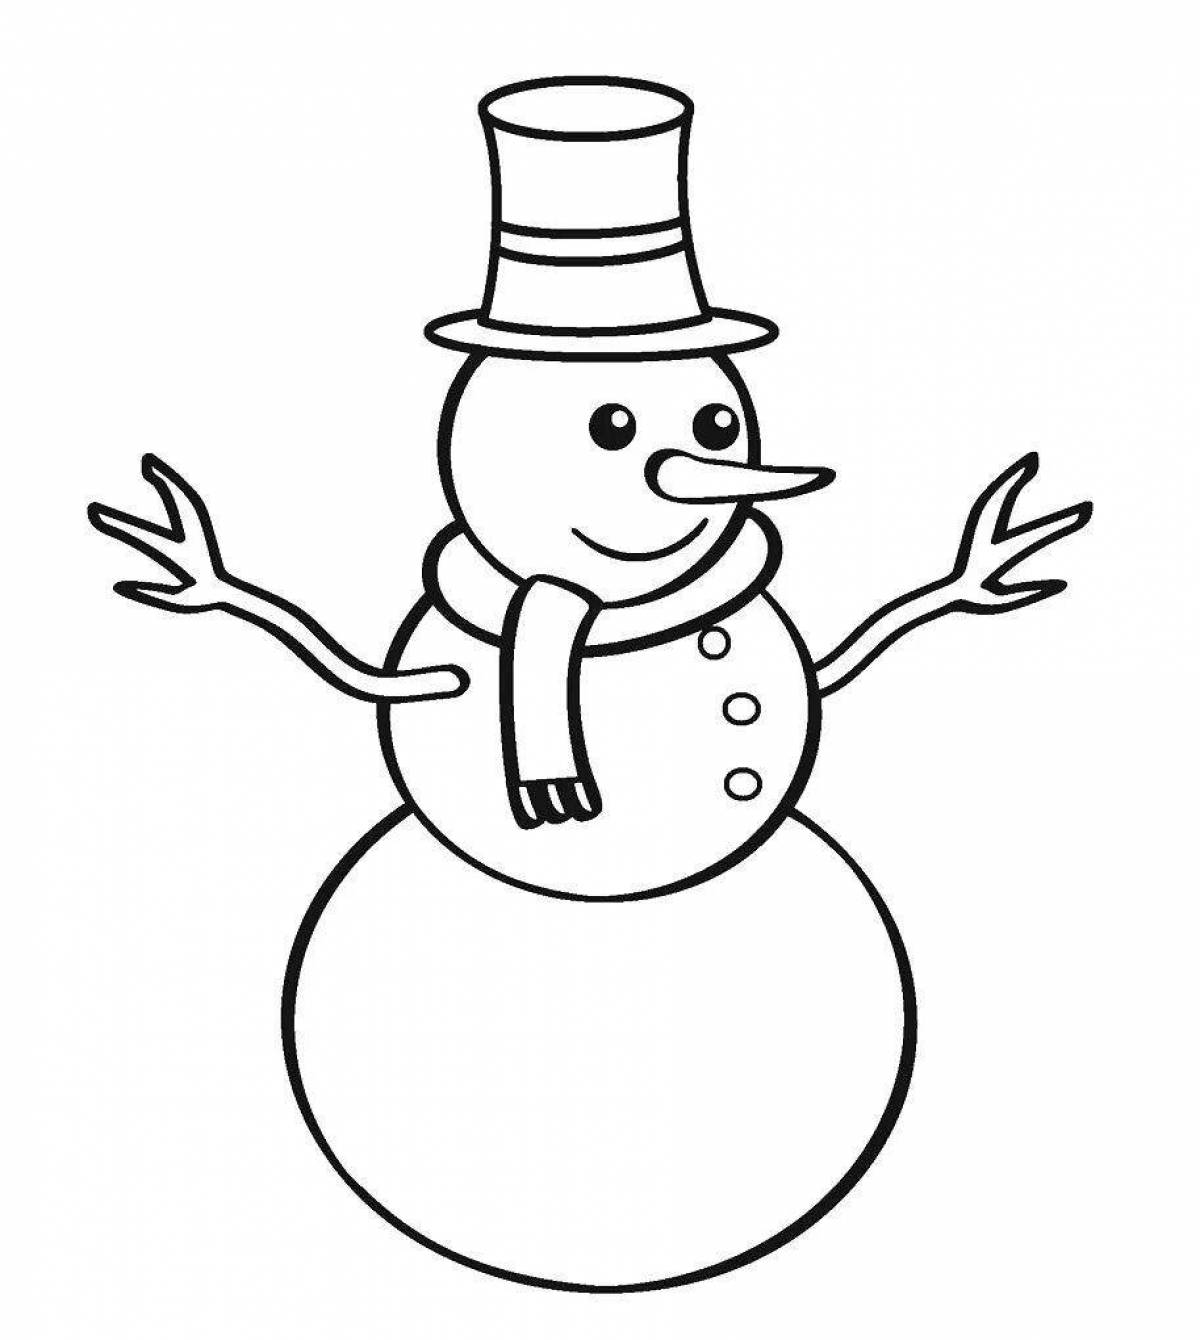 Animated snowman birthday coloring page